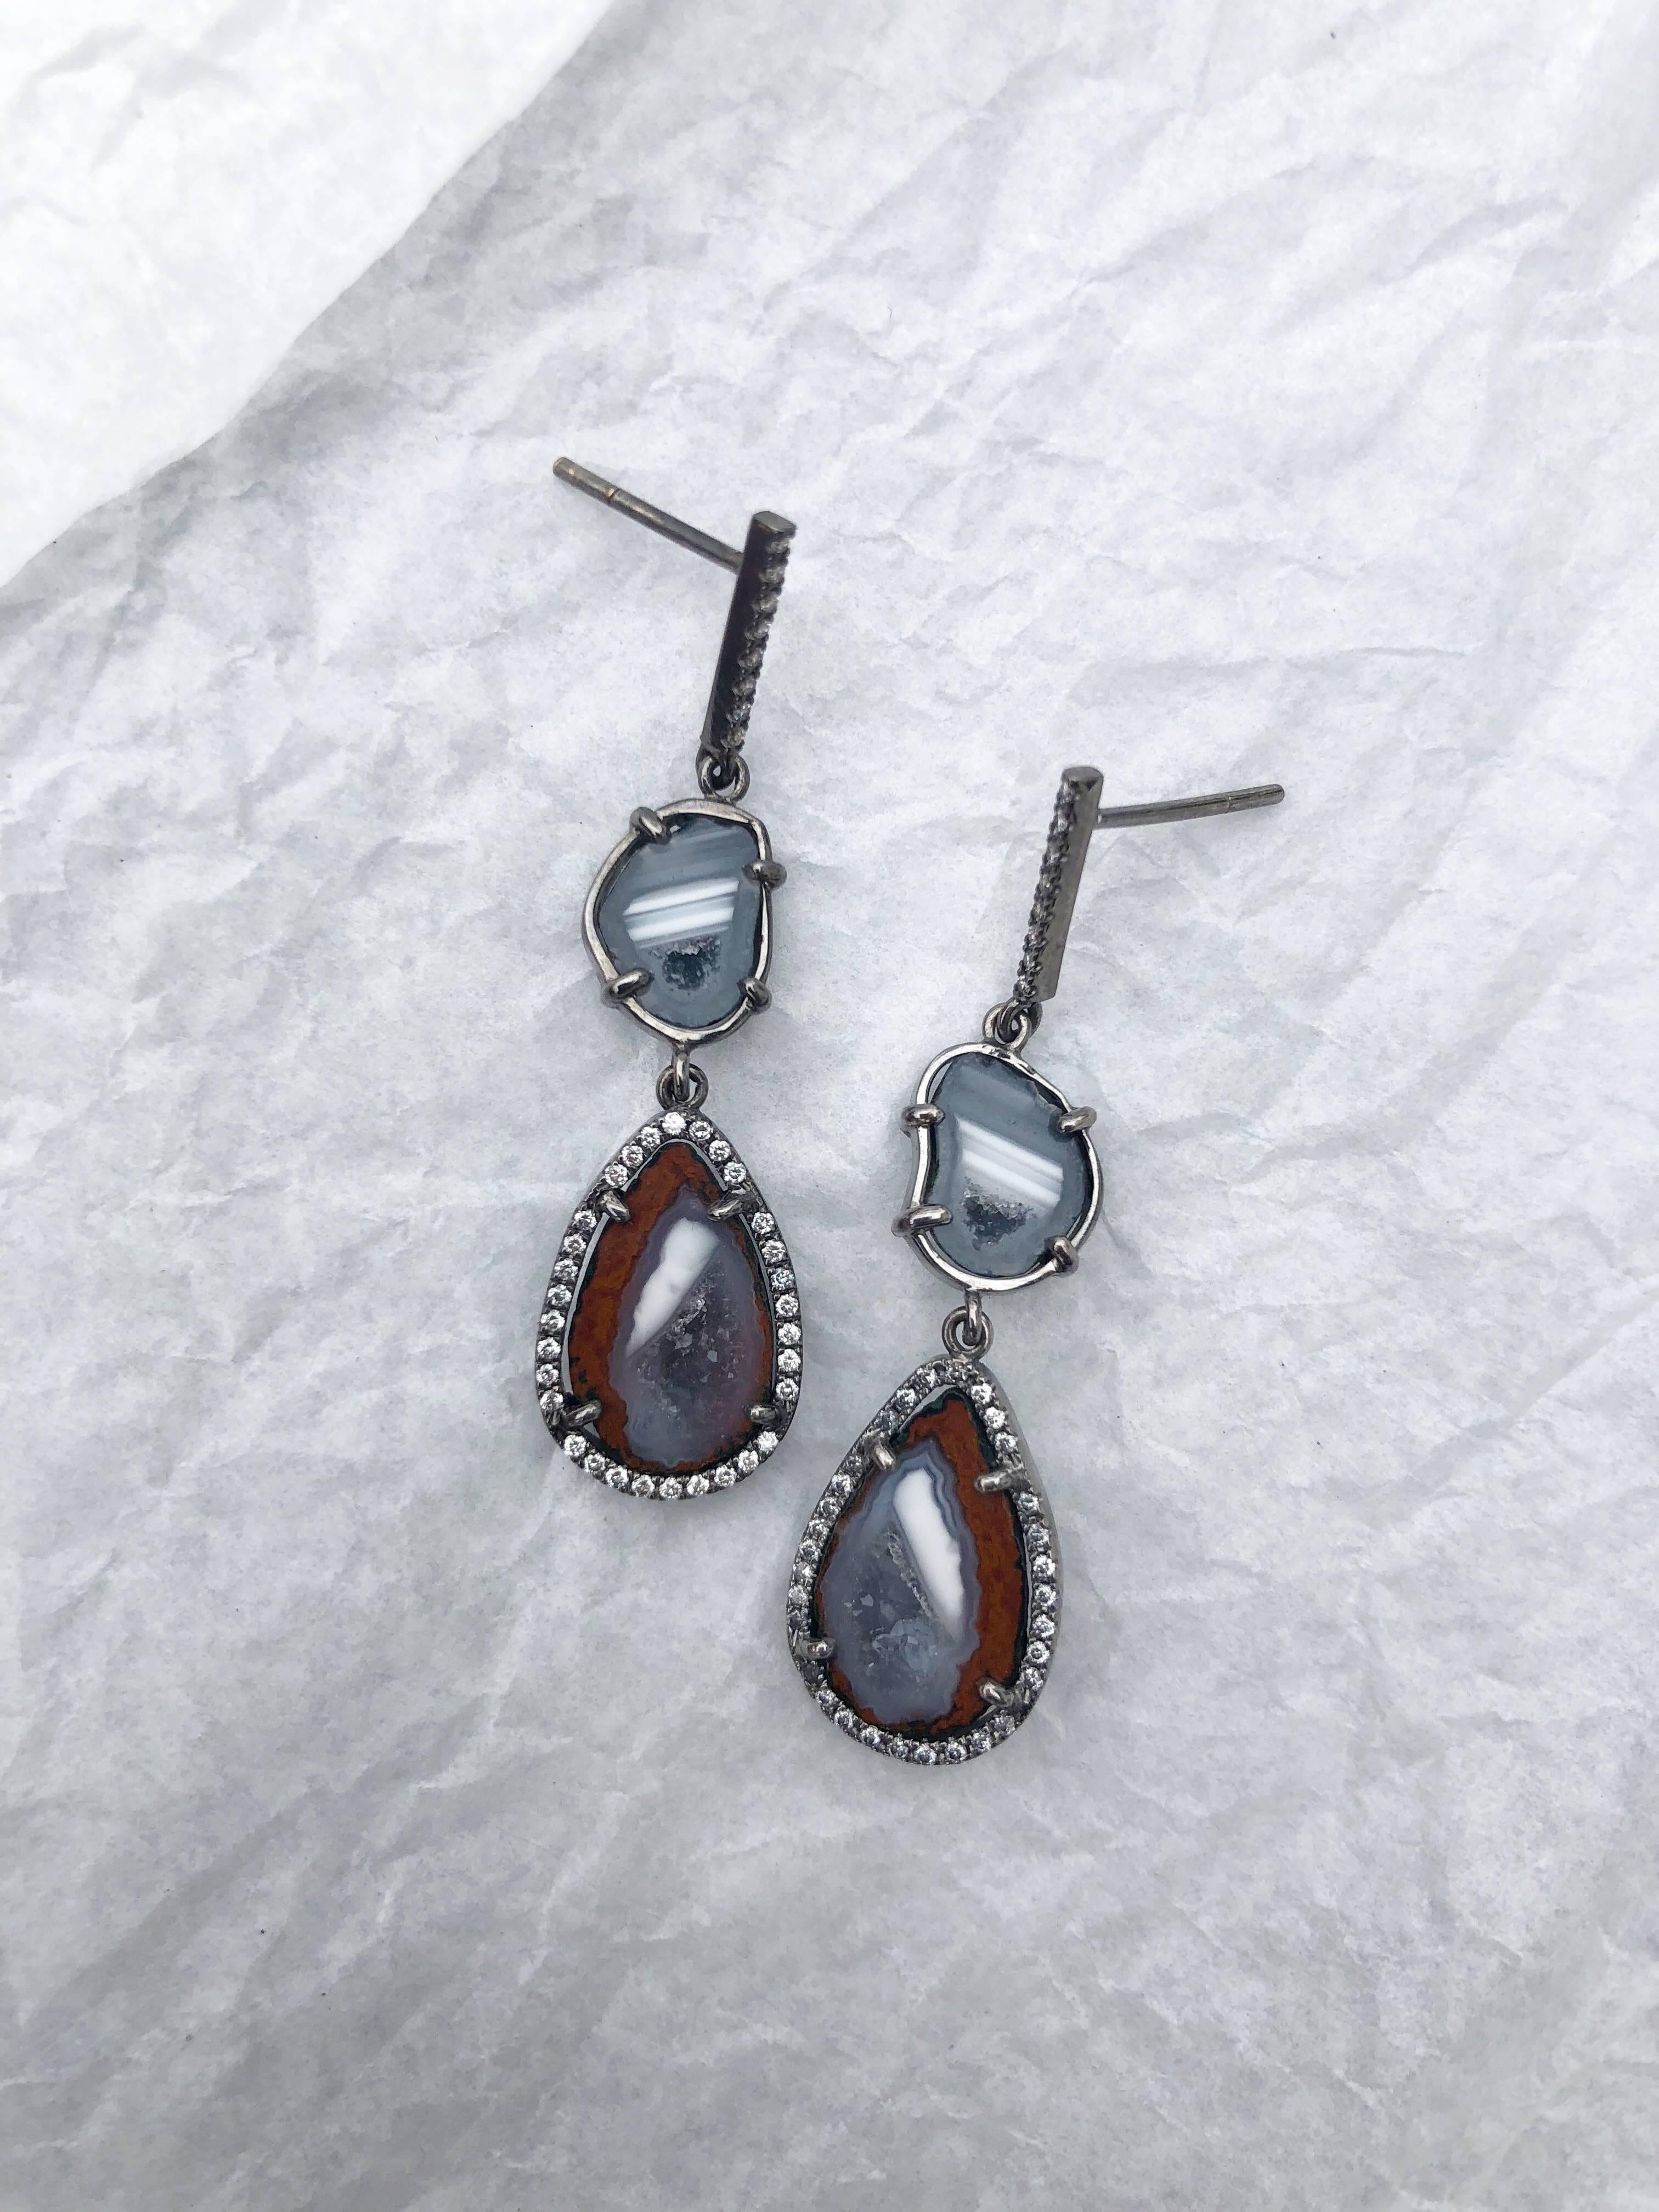 This handcrafted pair is made from 18K rhodium rose gold, centered with Black, Blue, Red Agate Geodes surrounded by 0.50 ct of glistering diamonds.
Style them with everything from T-shirts to dresses.